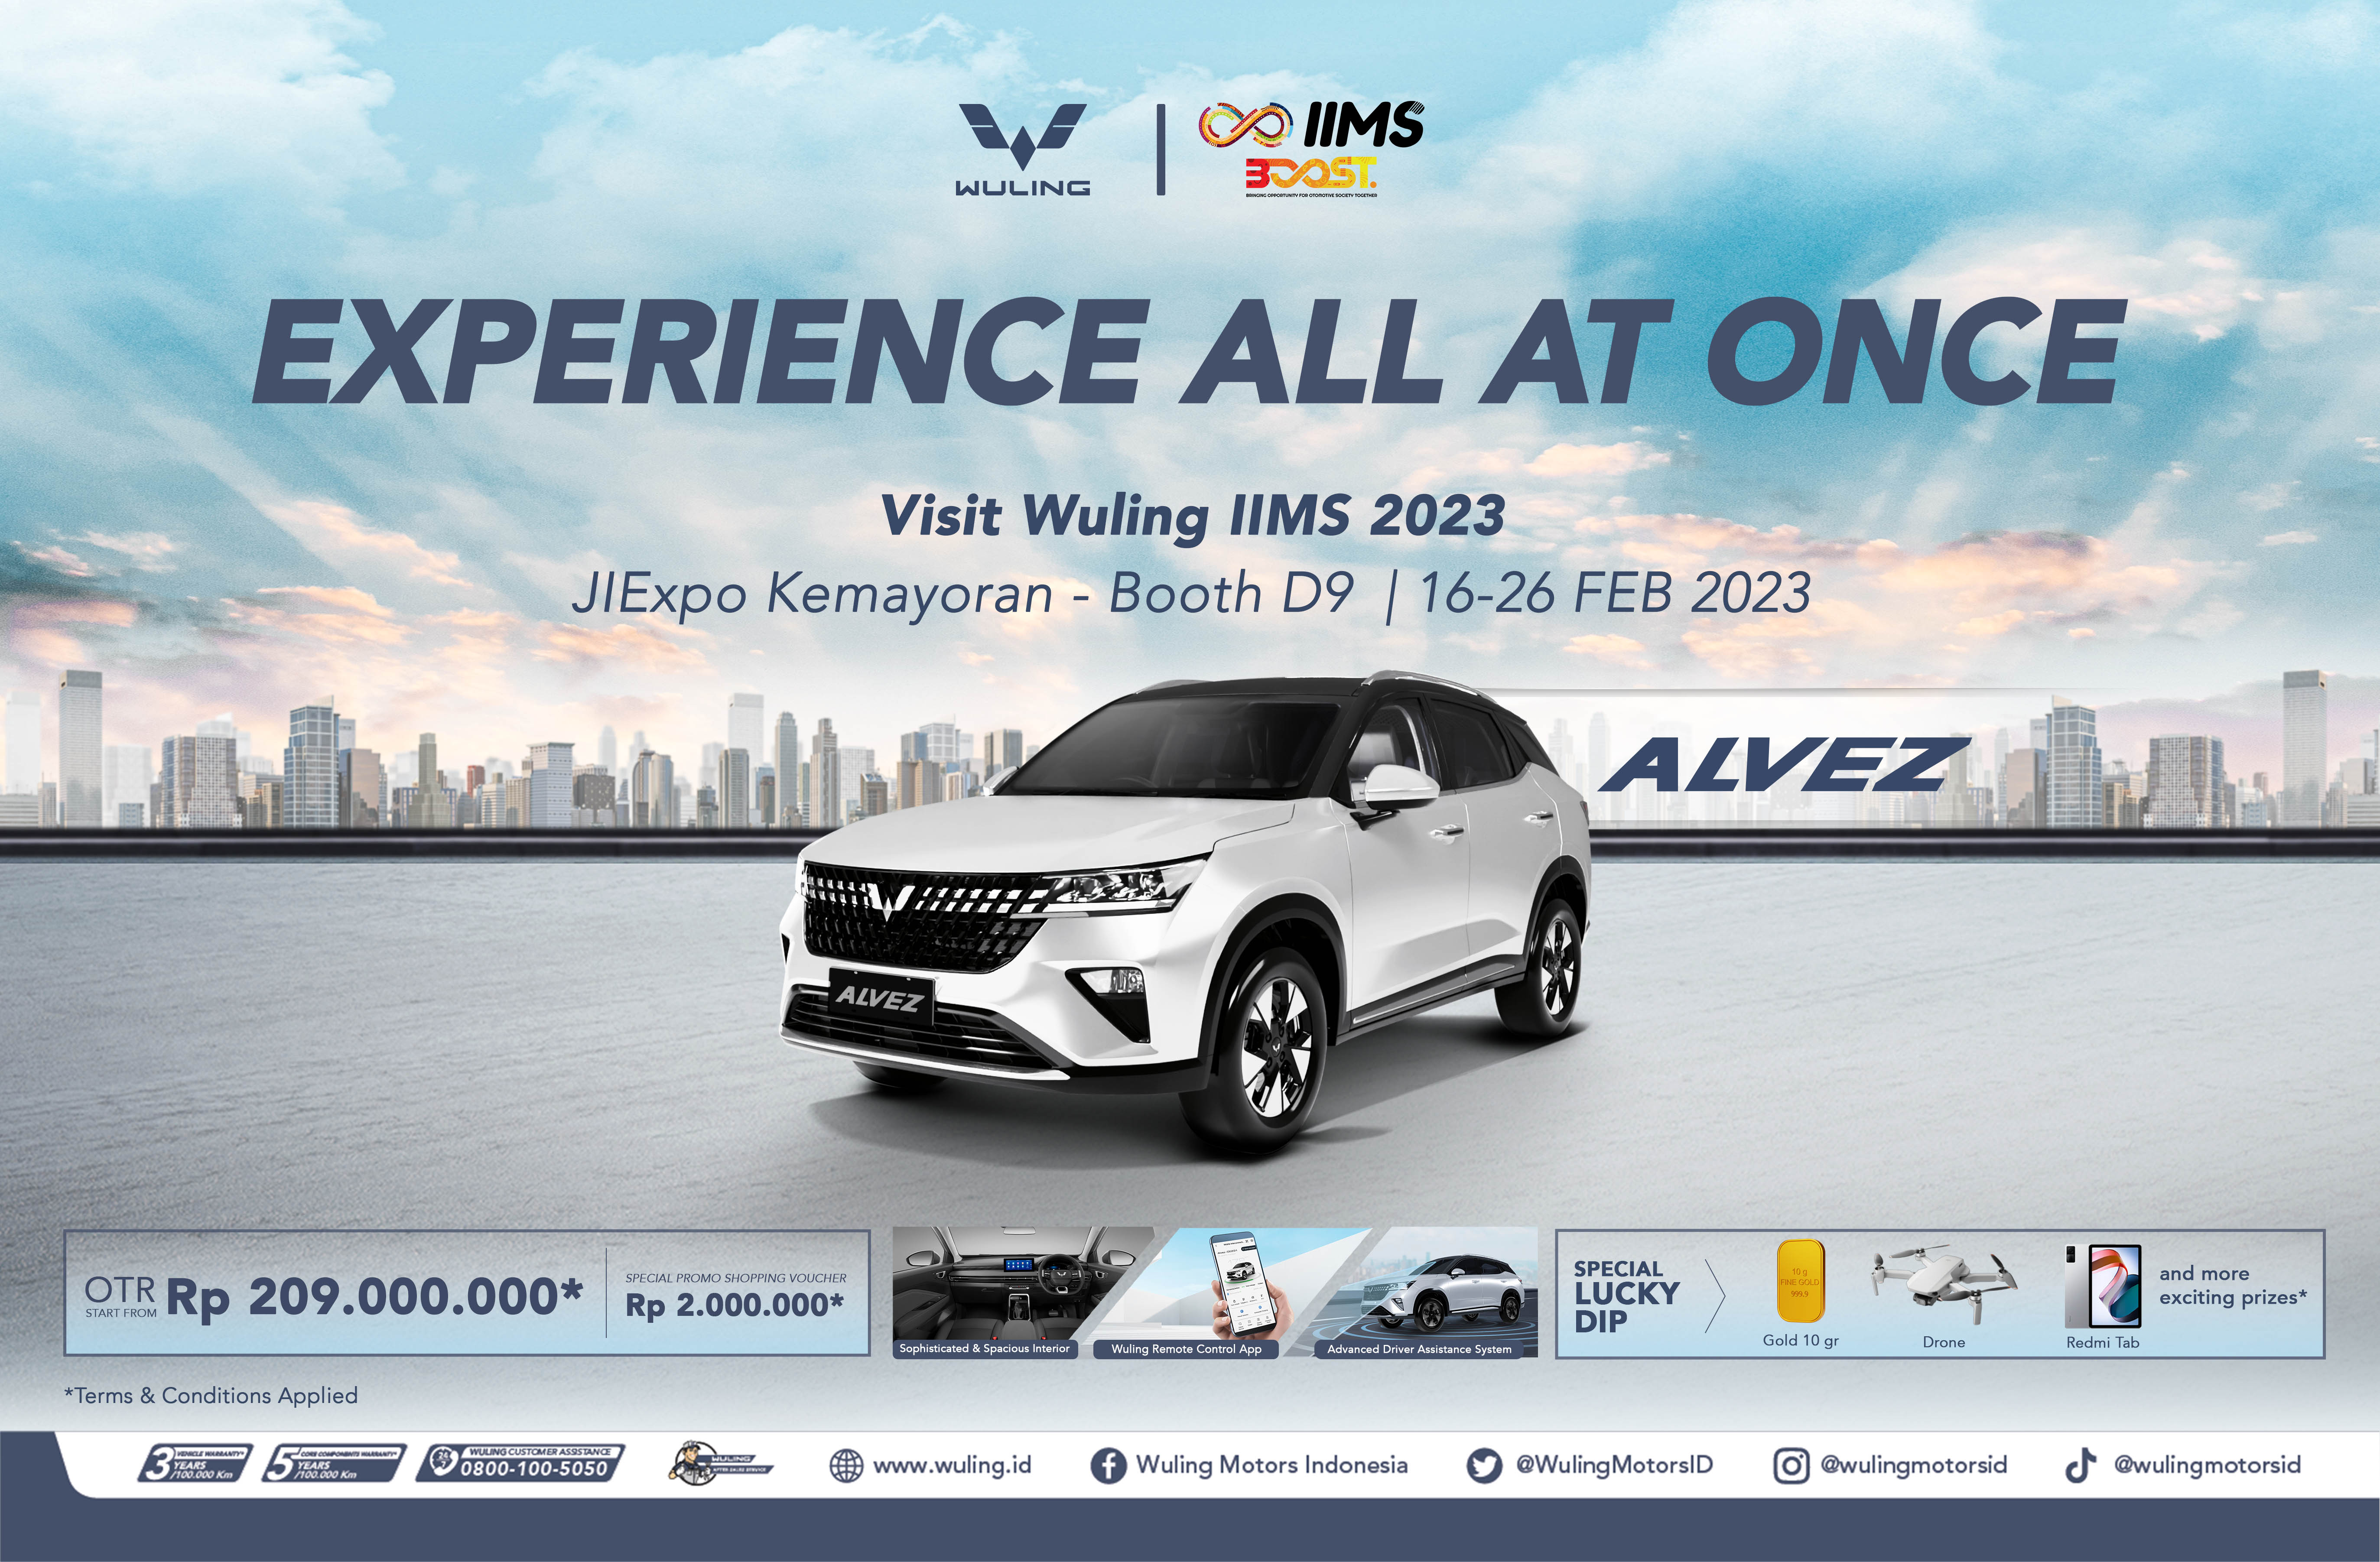 Image Wuling Carries The Spirit of ‘Experience All At Once’ at The IIMS 2023 Exhibition